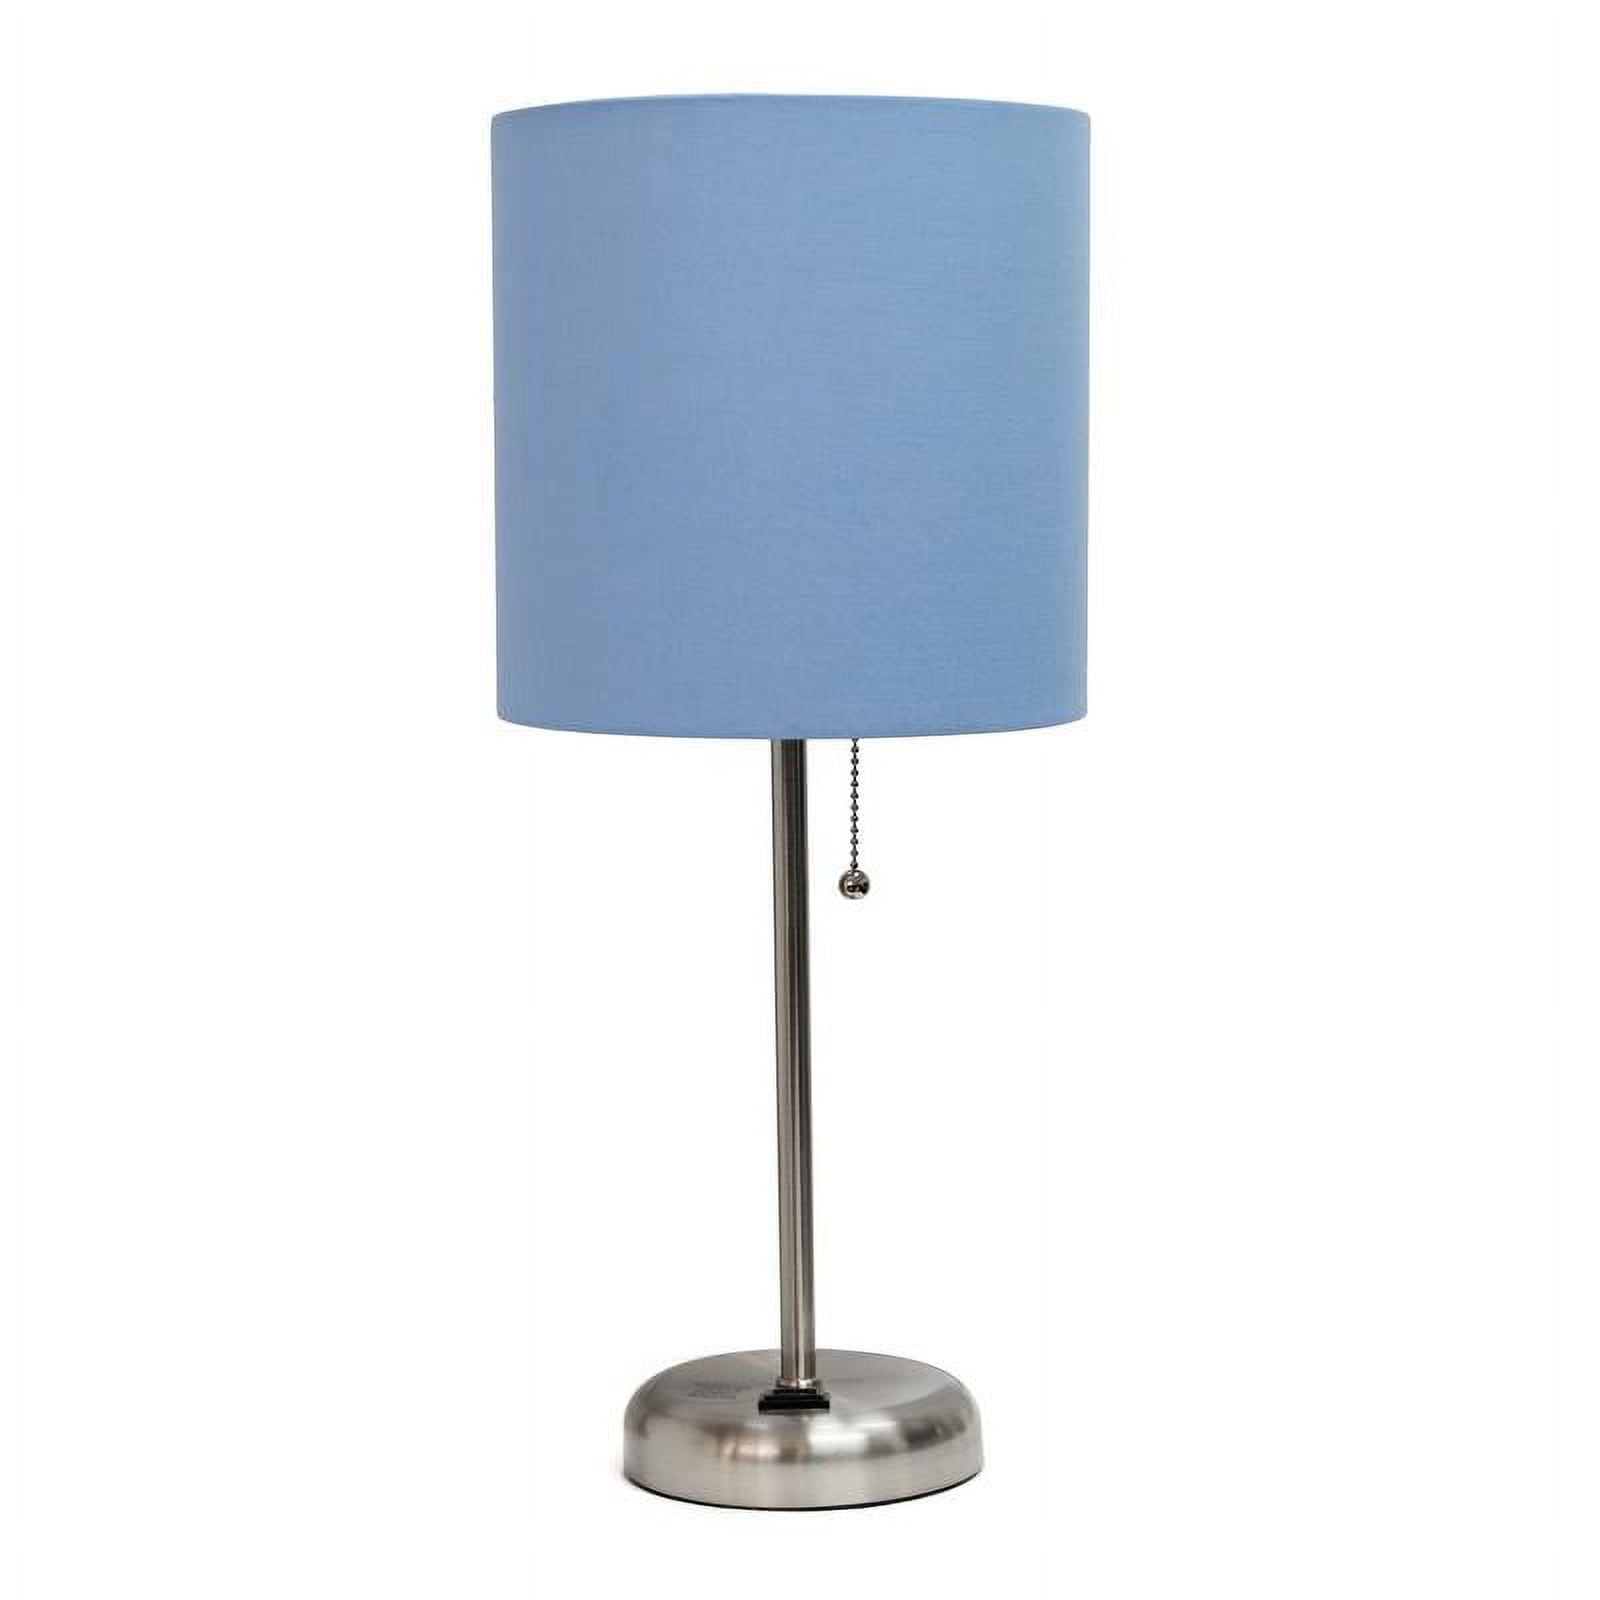 Lt2024-blu Stick Lamp With Charging Outlet & Fabric Shade, Blue